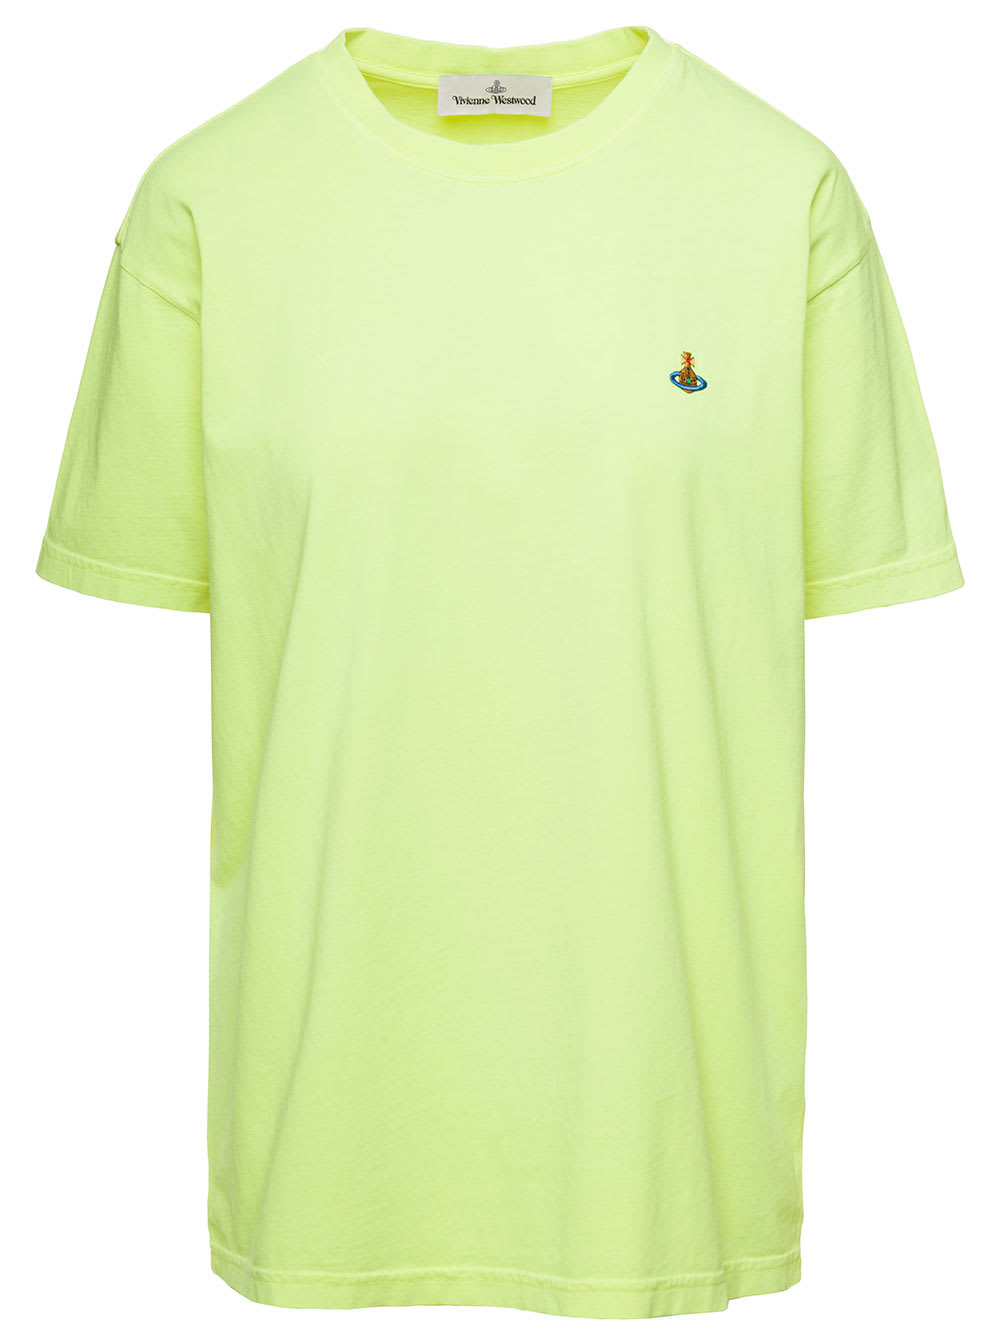 VIVIENNE WESTWOOD CREWNECK T-SHIRT WITH EMBROIDERED ORB LOGO IN YELLOW COTTON MAN